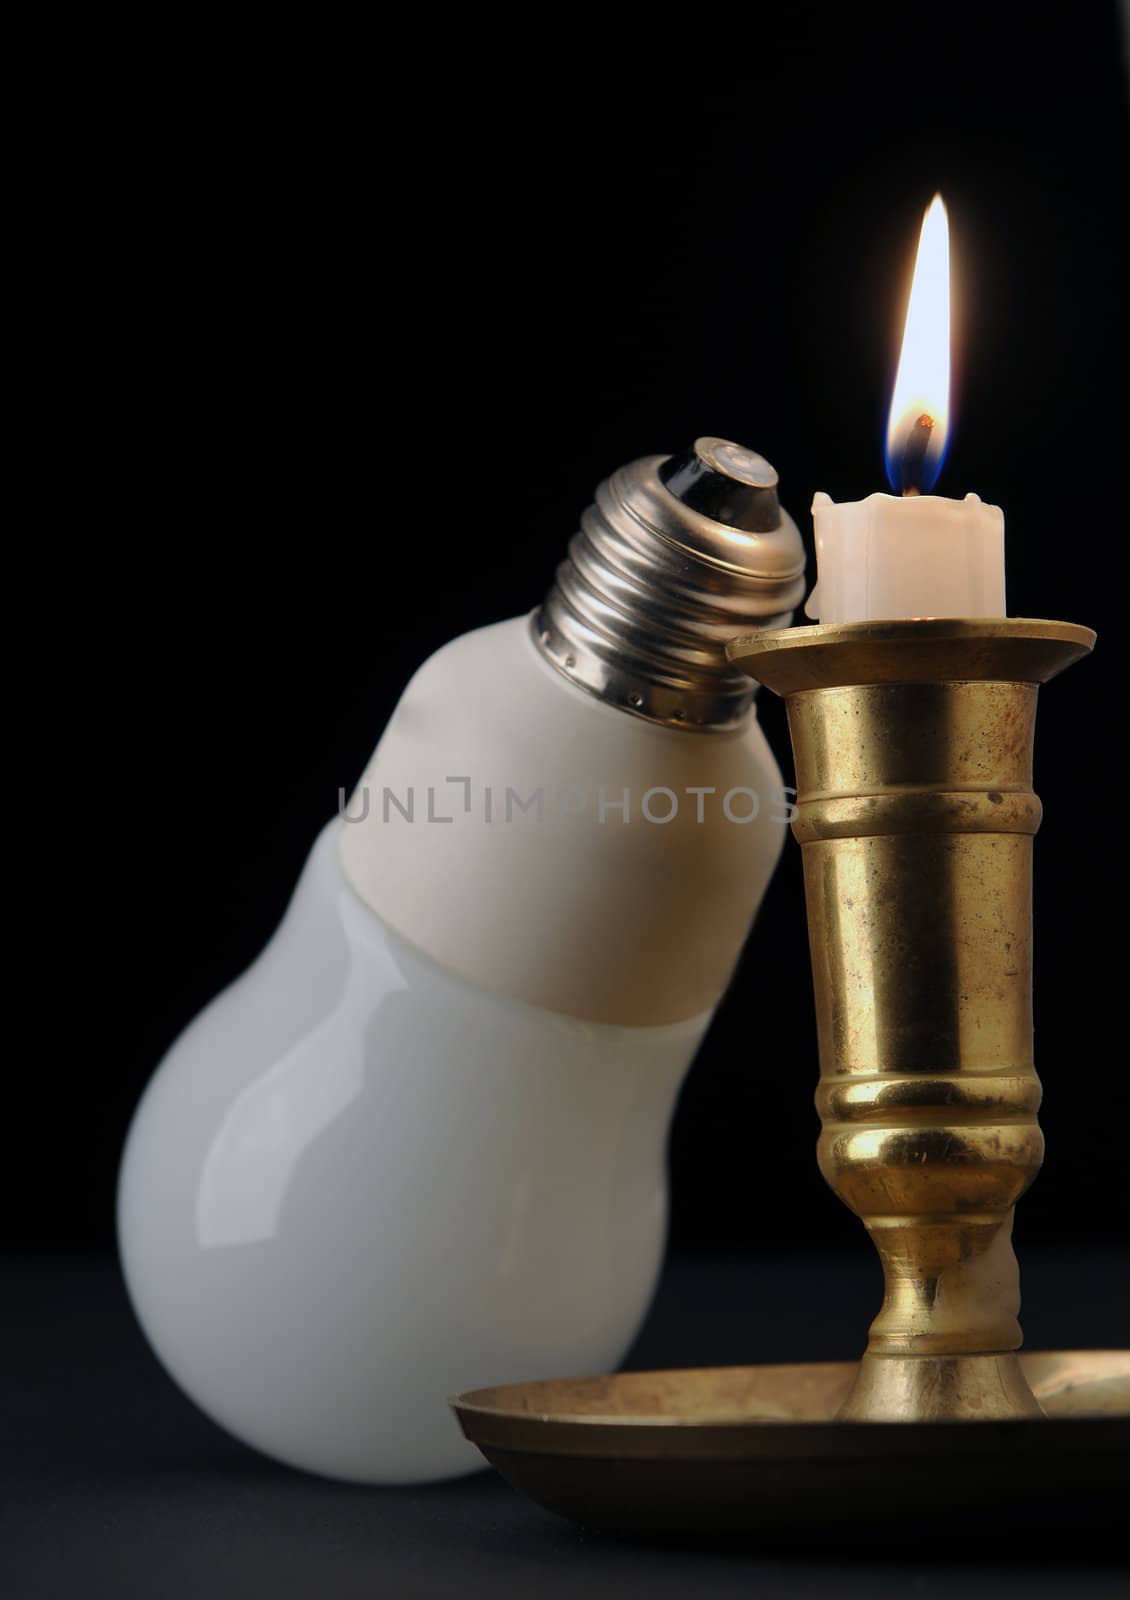 Aflame candle with modern bulb on black background